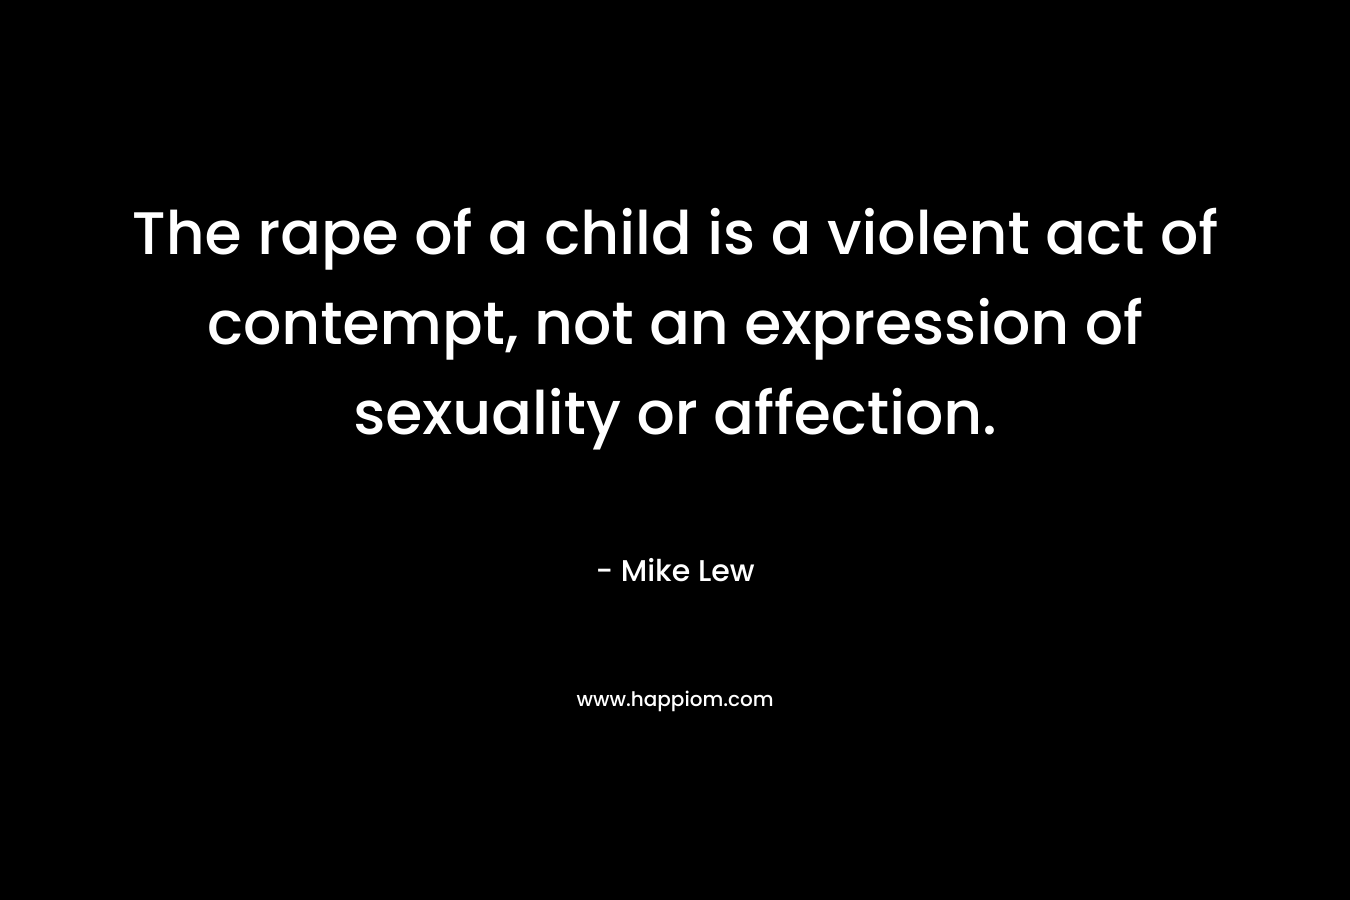 The rape of a child is a violent act of contempt, not an expression of sexuality or affection. – Mike Lew